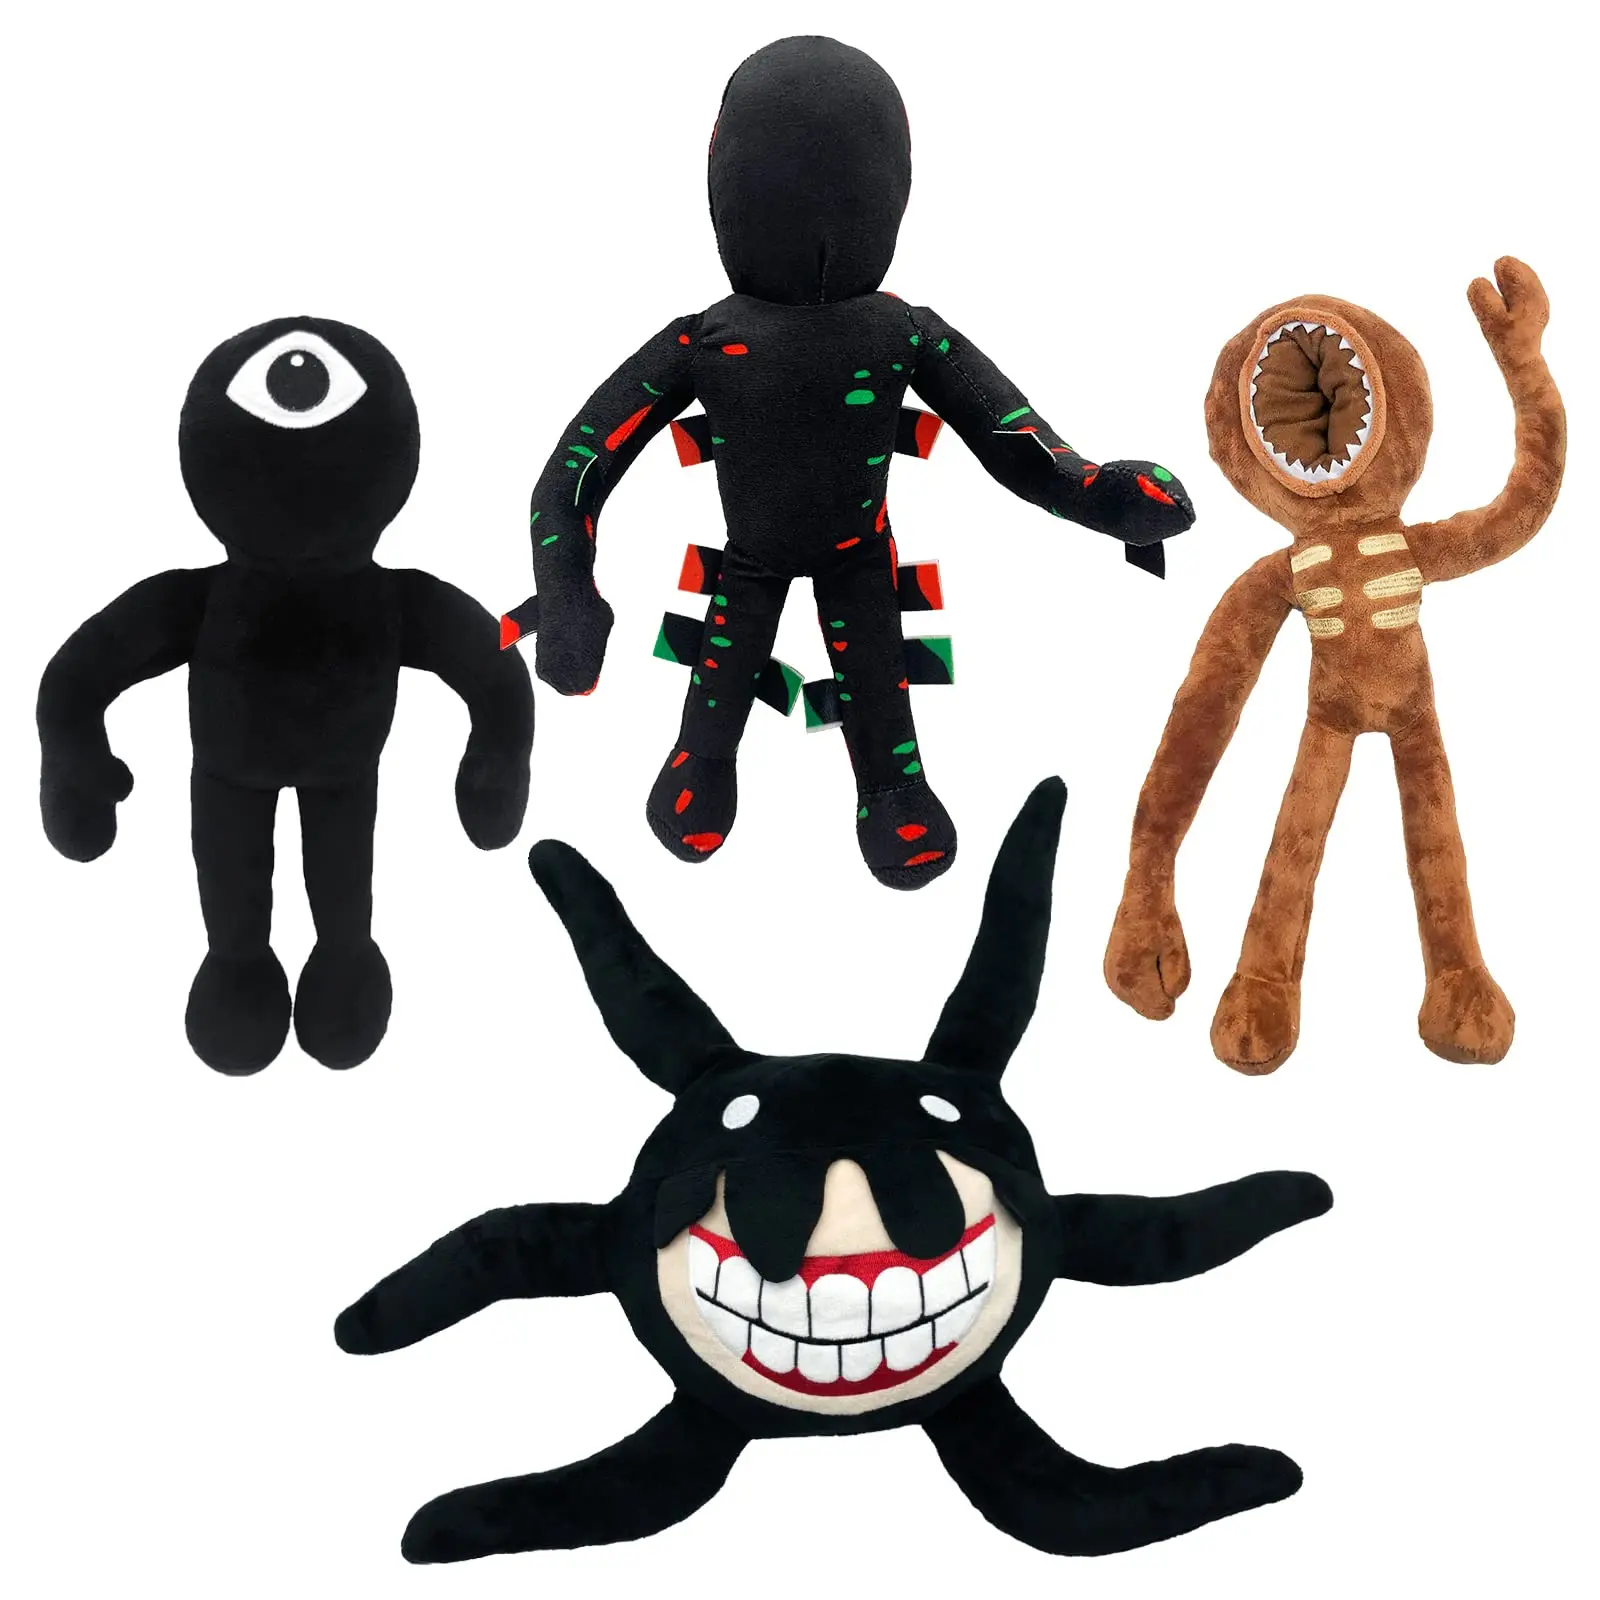  Doors Plush - 10 Halt Plushies Toy for Fans Gift, 2022 New  Monster Horror Game Stuffed Figure Doll for Kids and Adults, Halloween  Christmas Birthday Choice for Boys Girls : Toys